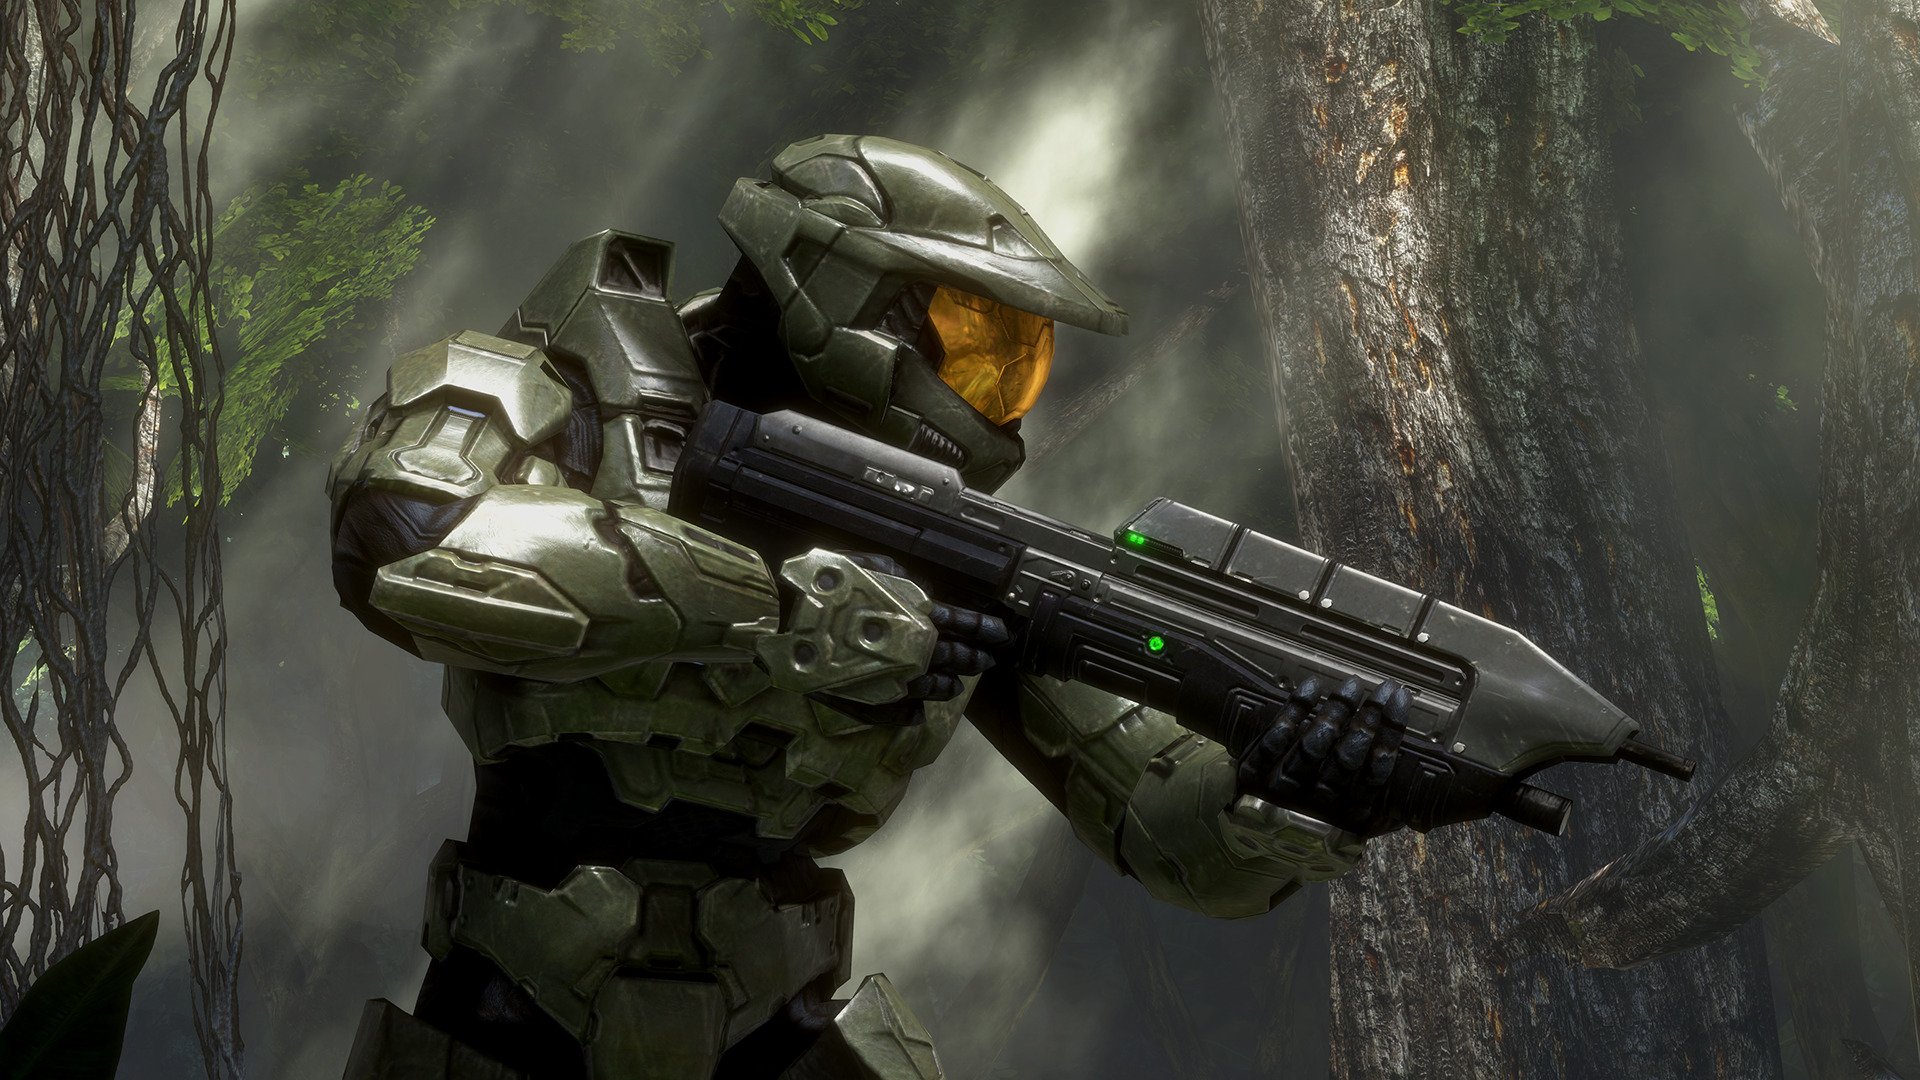 halo episode 5 release date and time